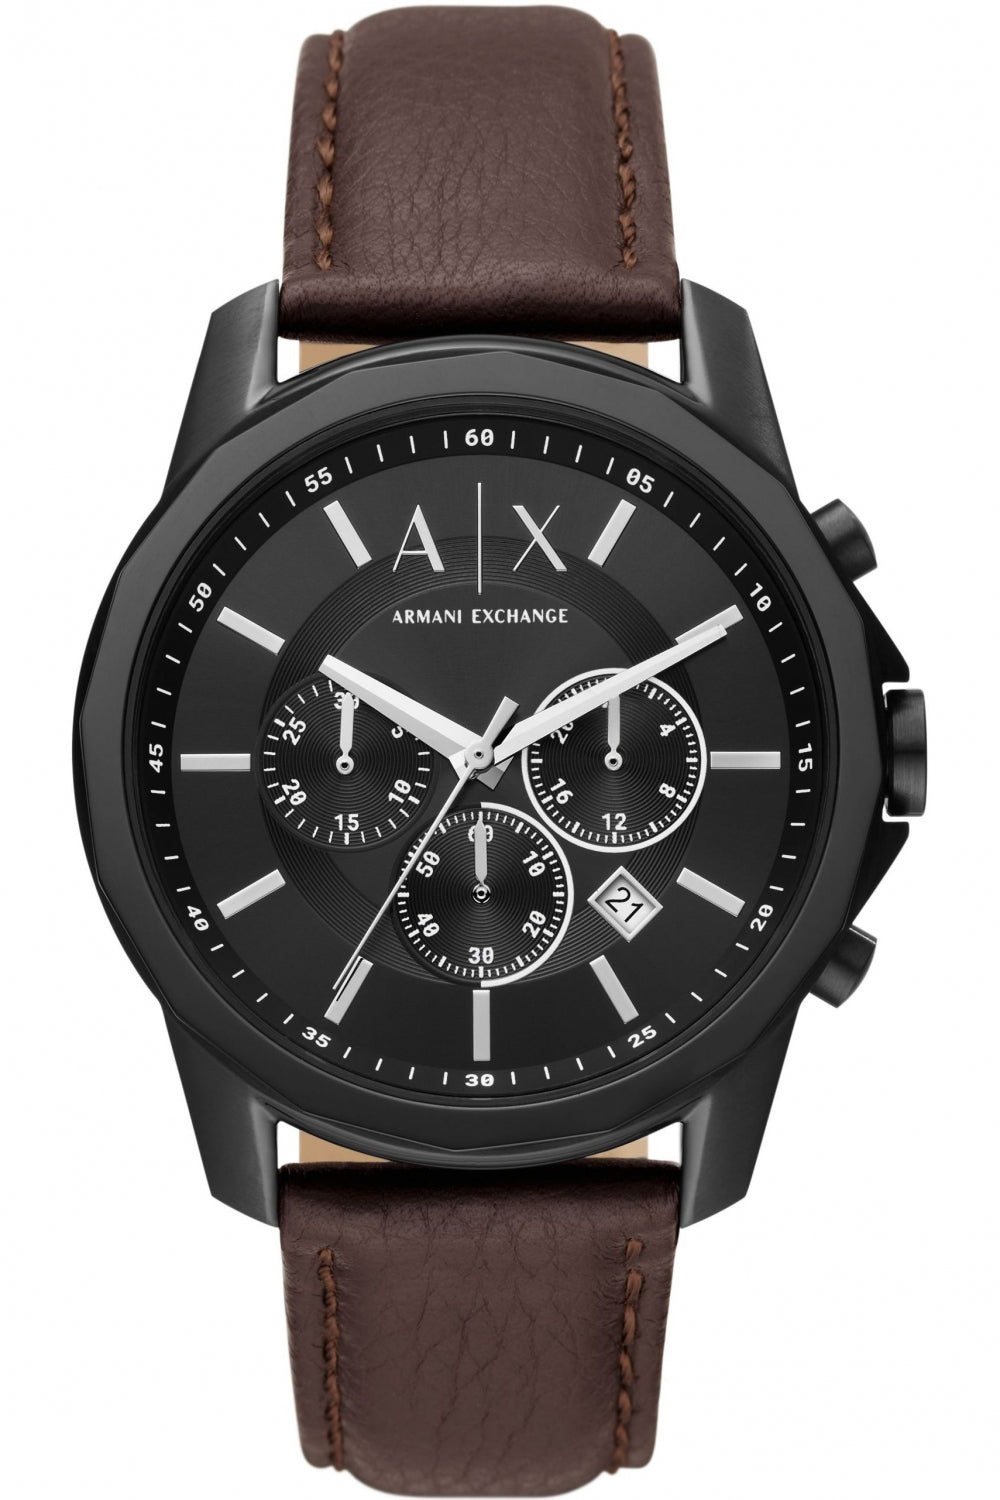 Armani Exchange Chronograph Brown Leather Men's Watch AX1732 – Watches ...